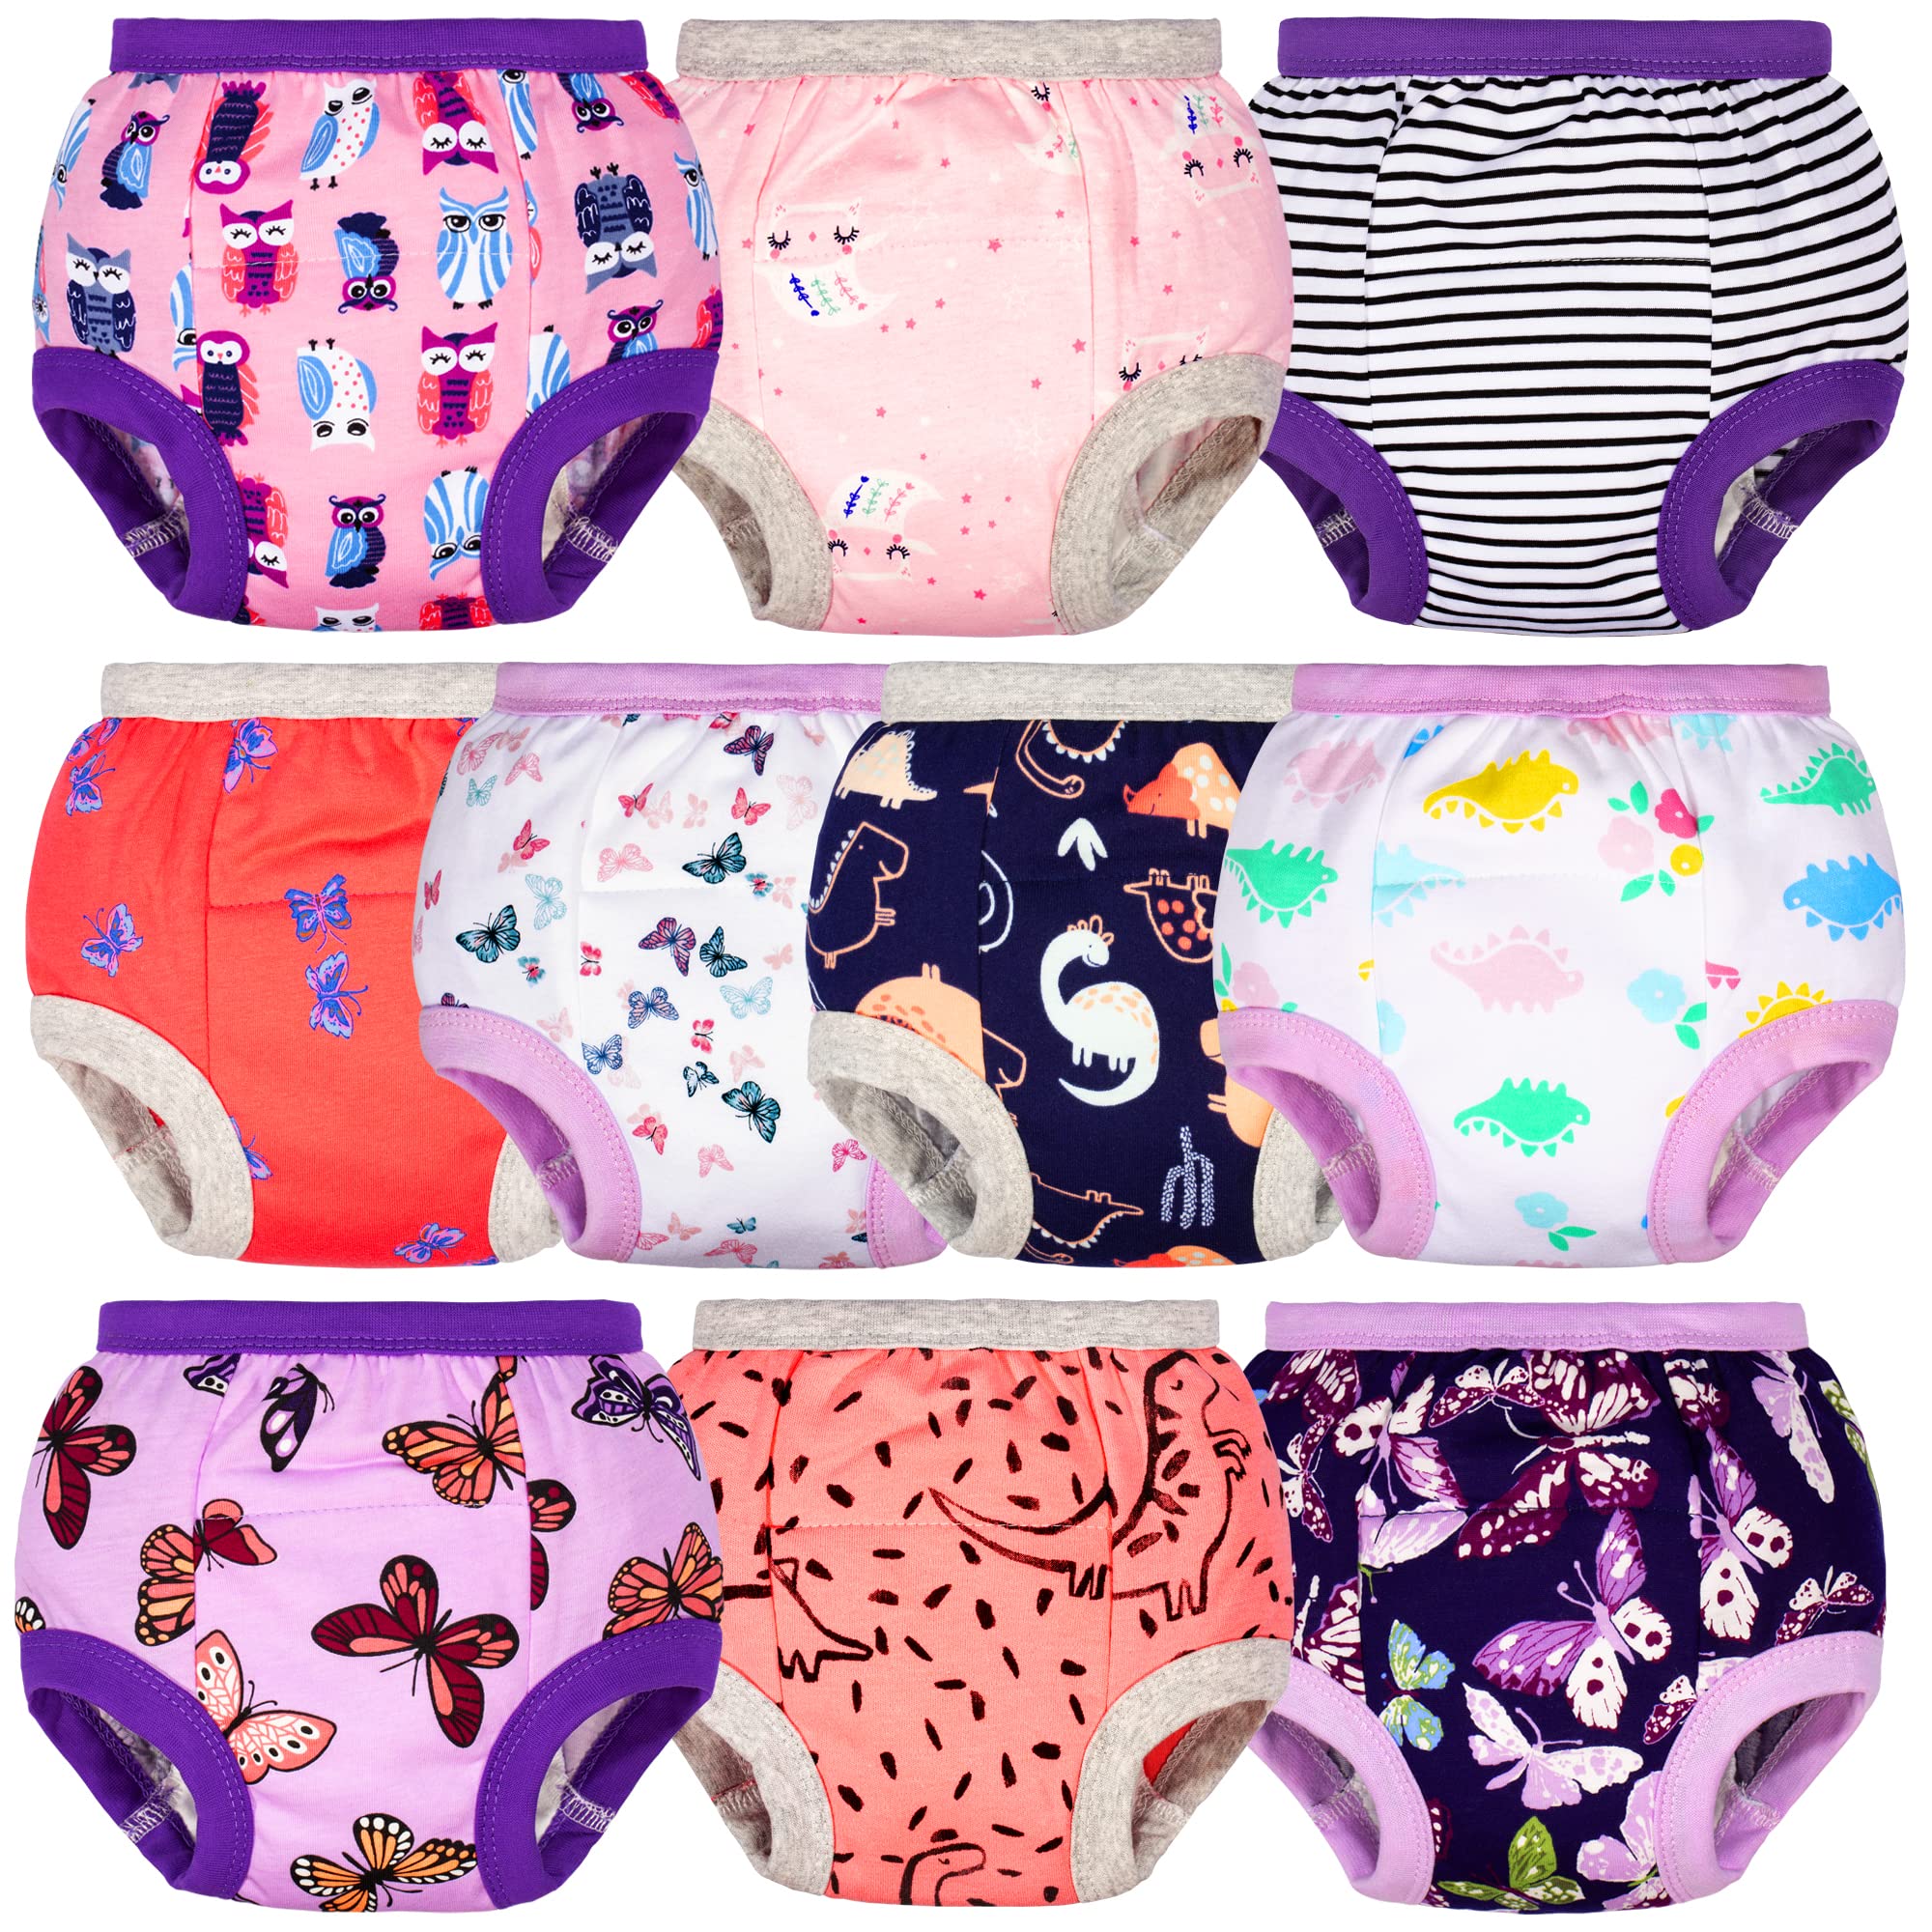 BIG ELEPHANT Potty Training Pants for Baby Boys and Girl 100% Cotton  Waterproof Training Underwear